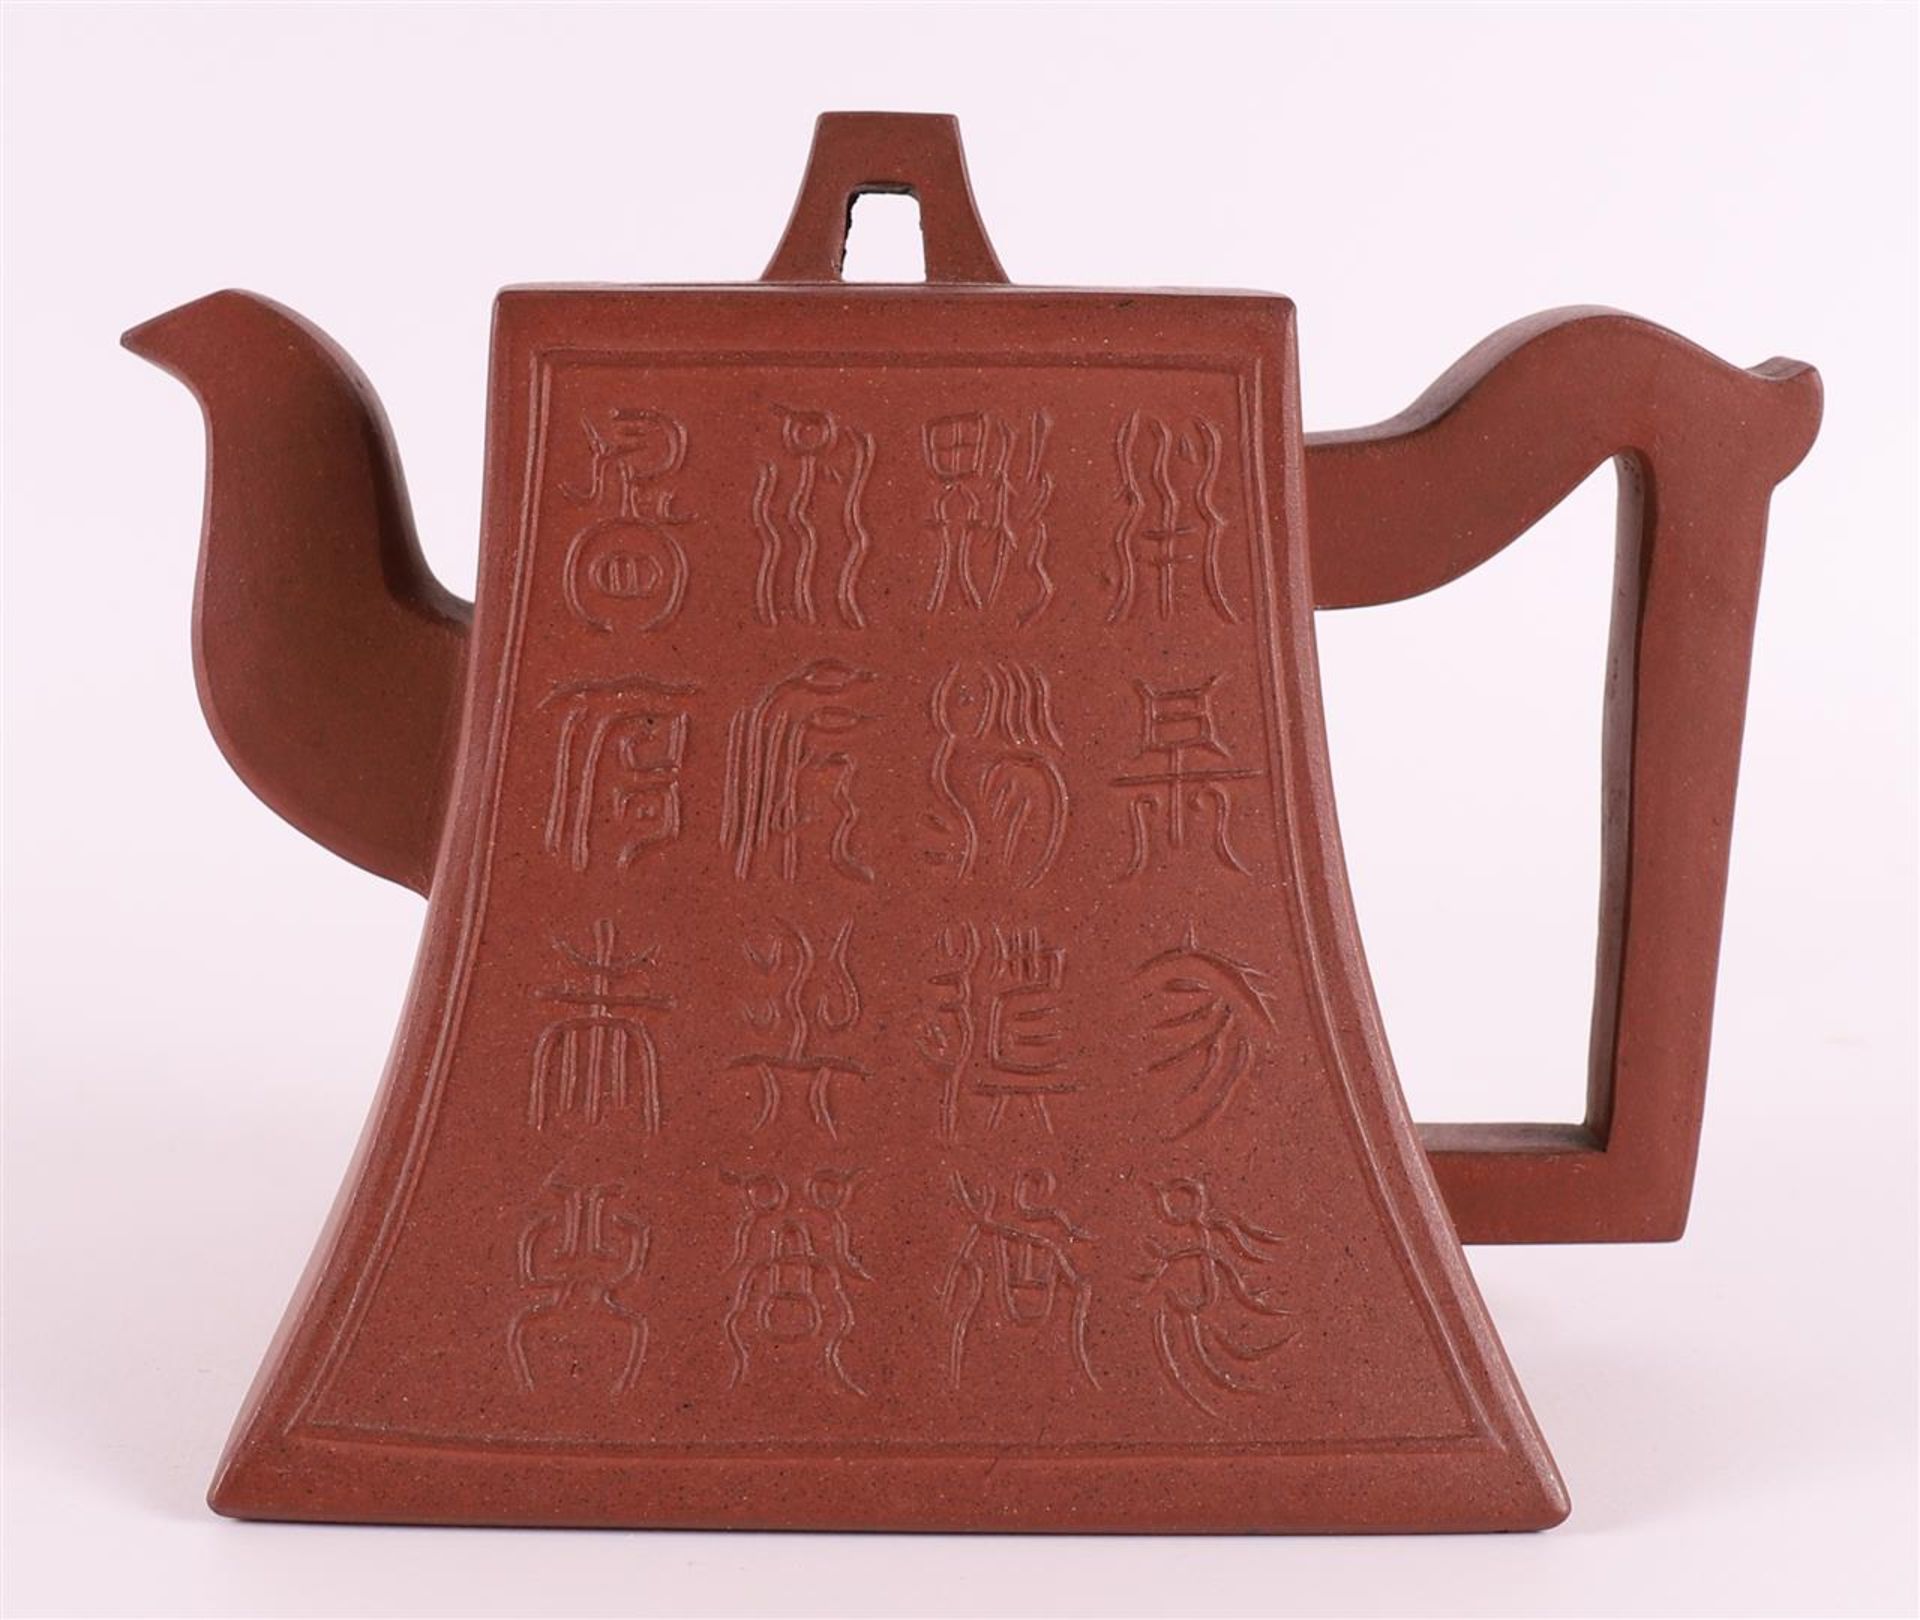 A tapered model yixing teapot, China, 20th century. Decoration of character signs, marked with